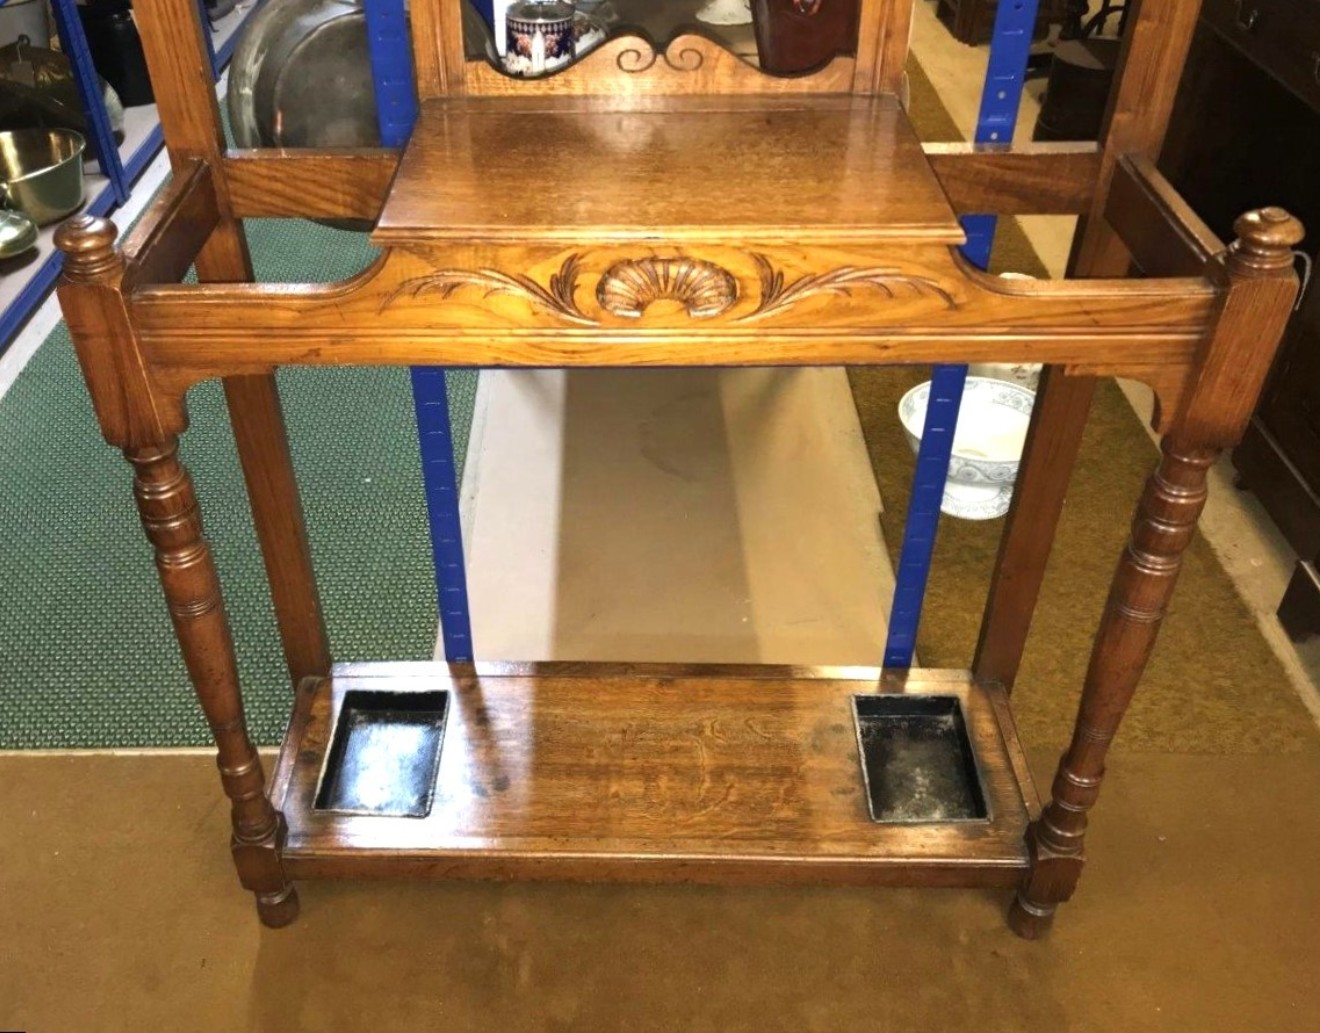 Antique Arts and Crafts Oak Mirrored Hall Stand